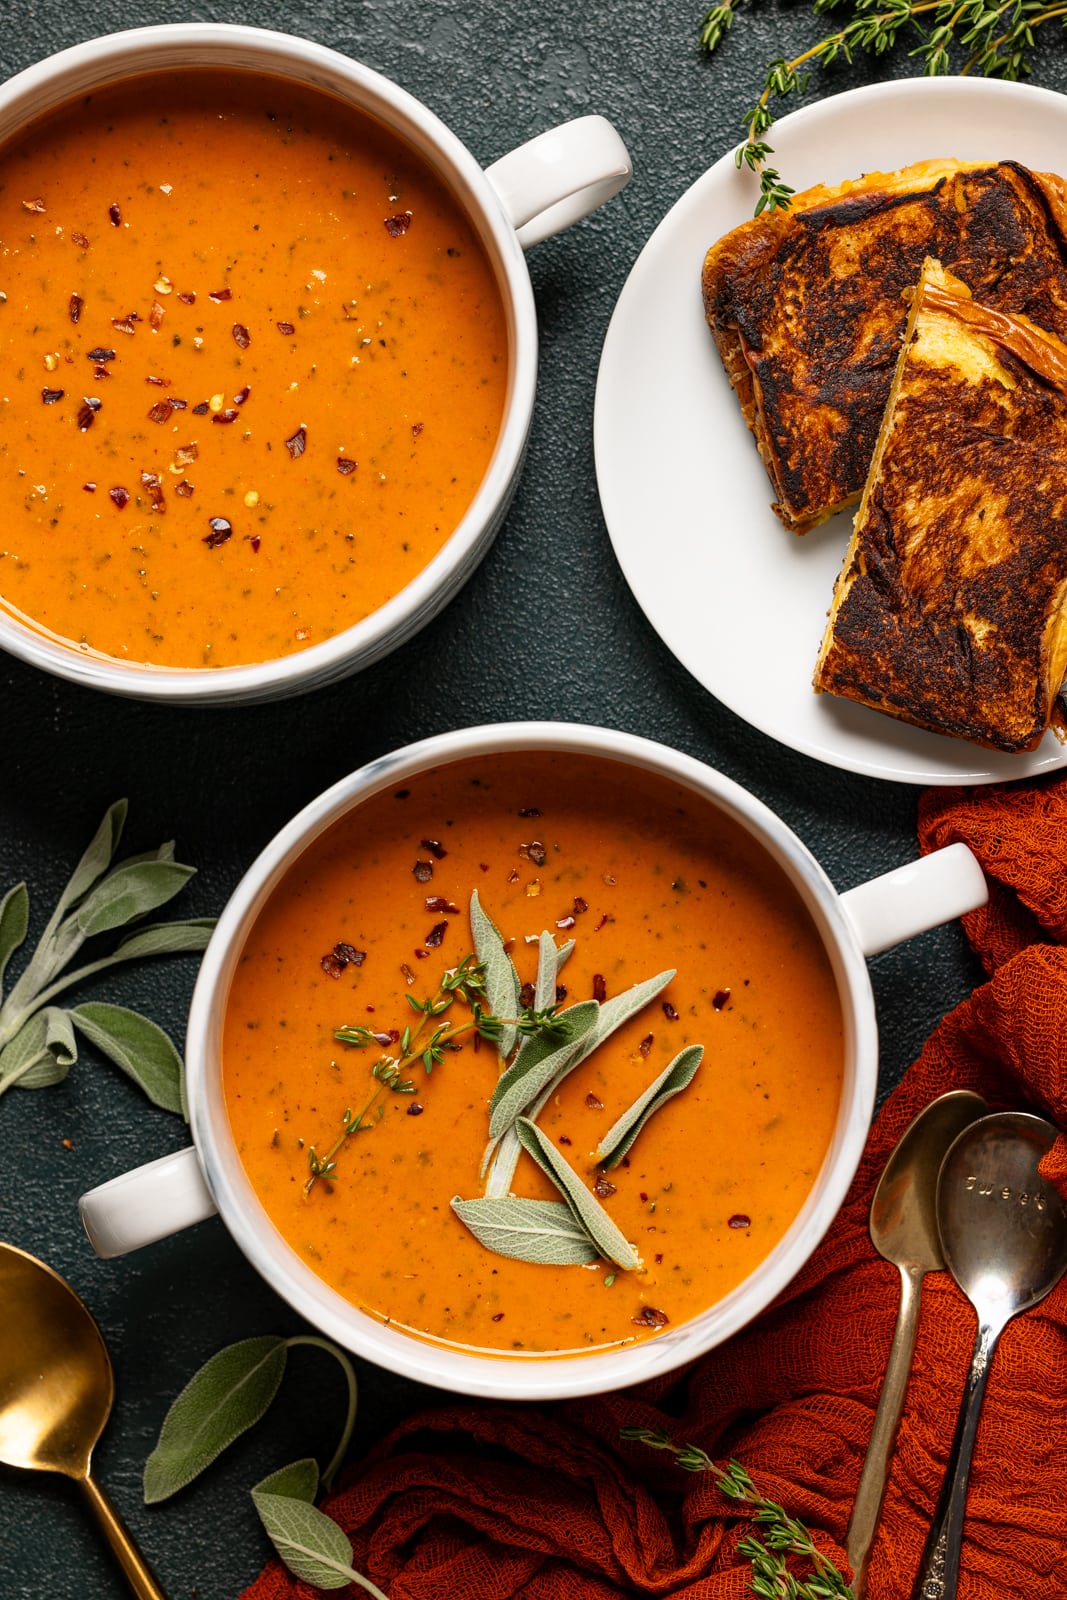 Soups in two white bowls with grilled cheese and two spoons.